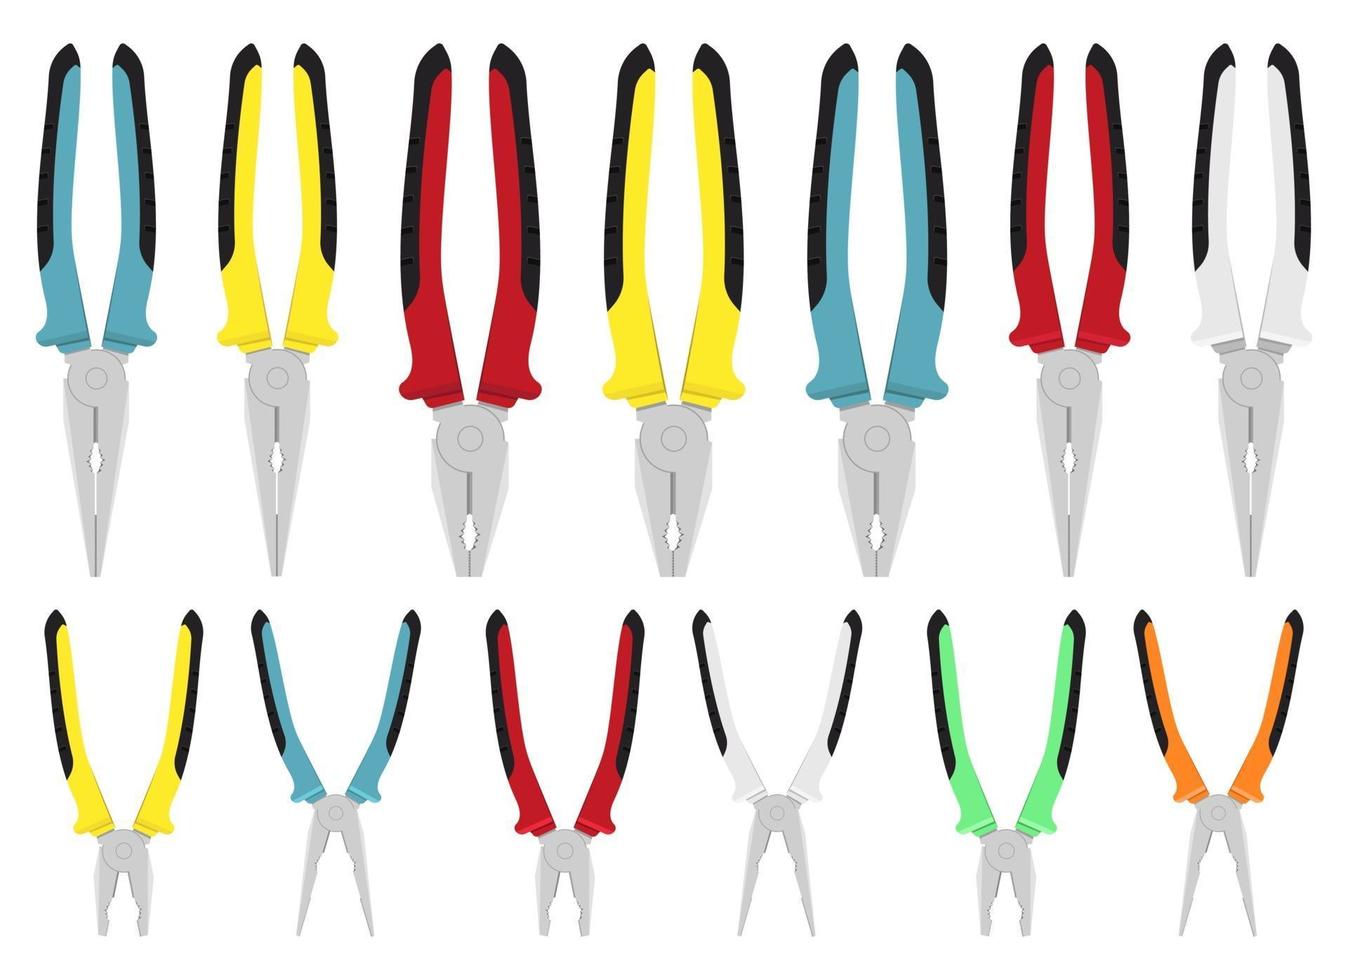 Pliers vector design illustration set isolated on white background